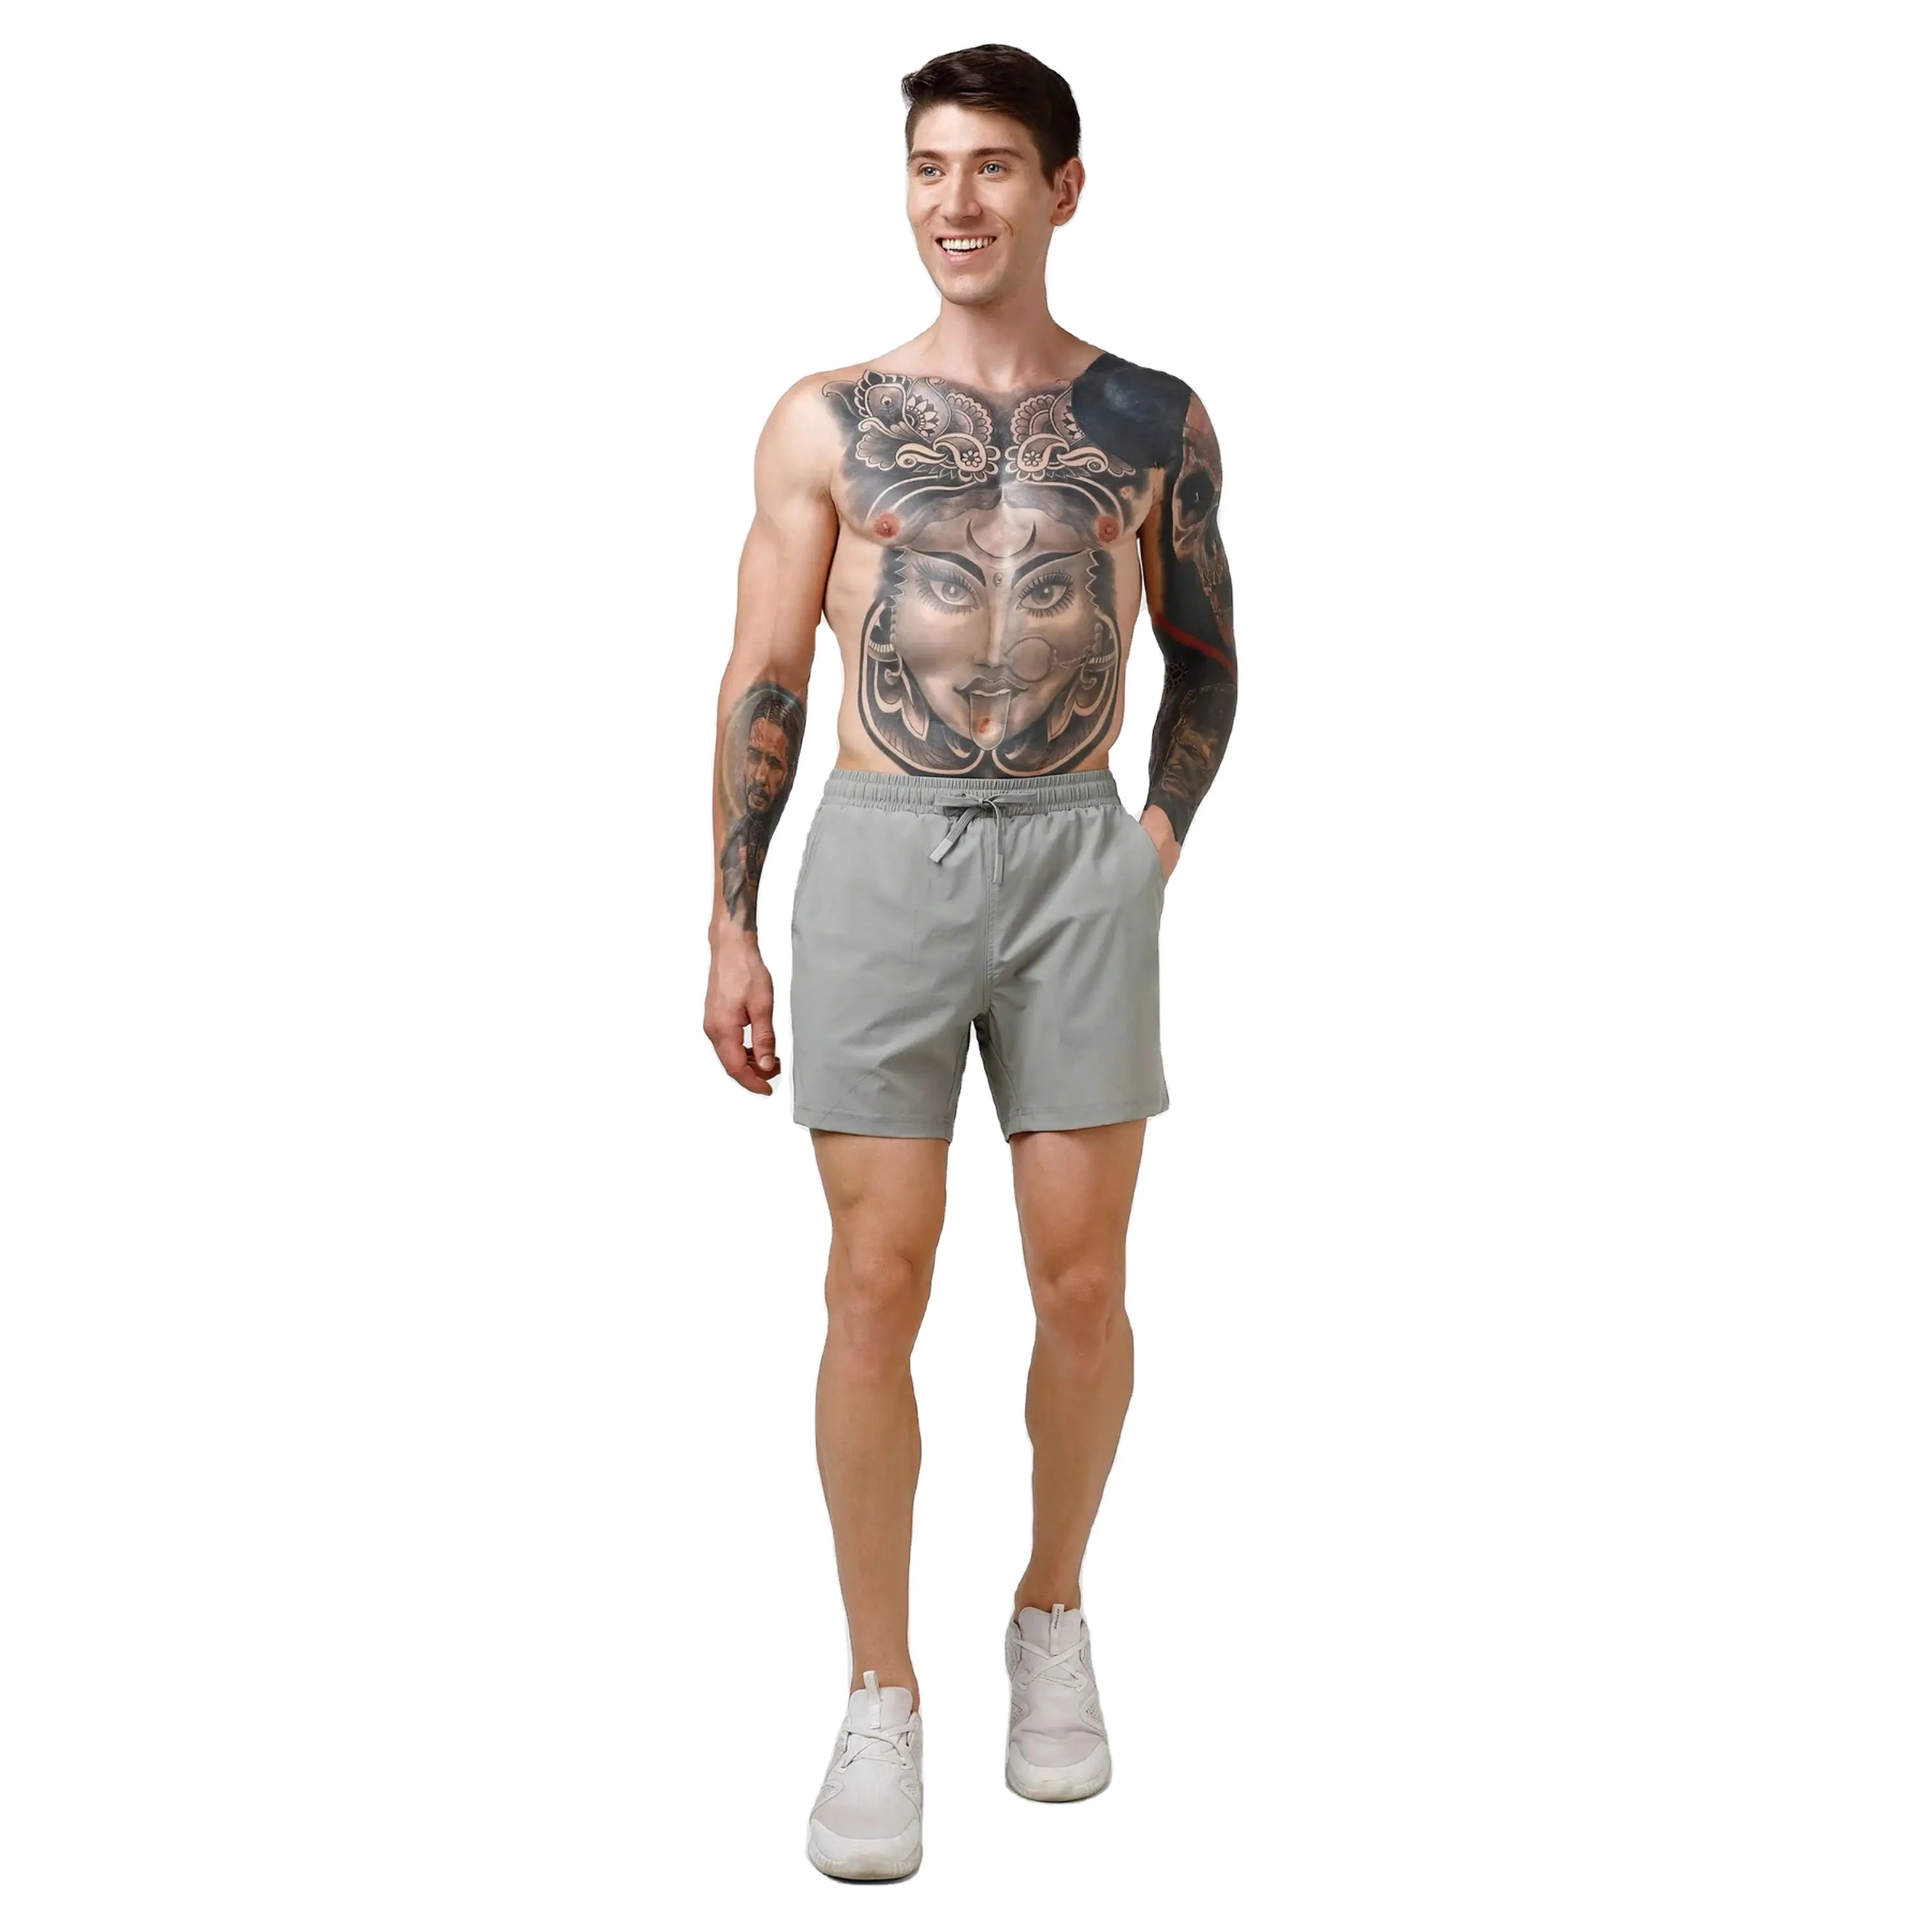 "Men's Breathable Performance Shorts - Ideal for Gym, Sports, and Outdoor Activities, Available in Multiple Colors and Sizes"